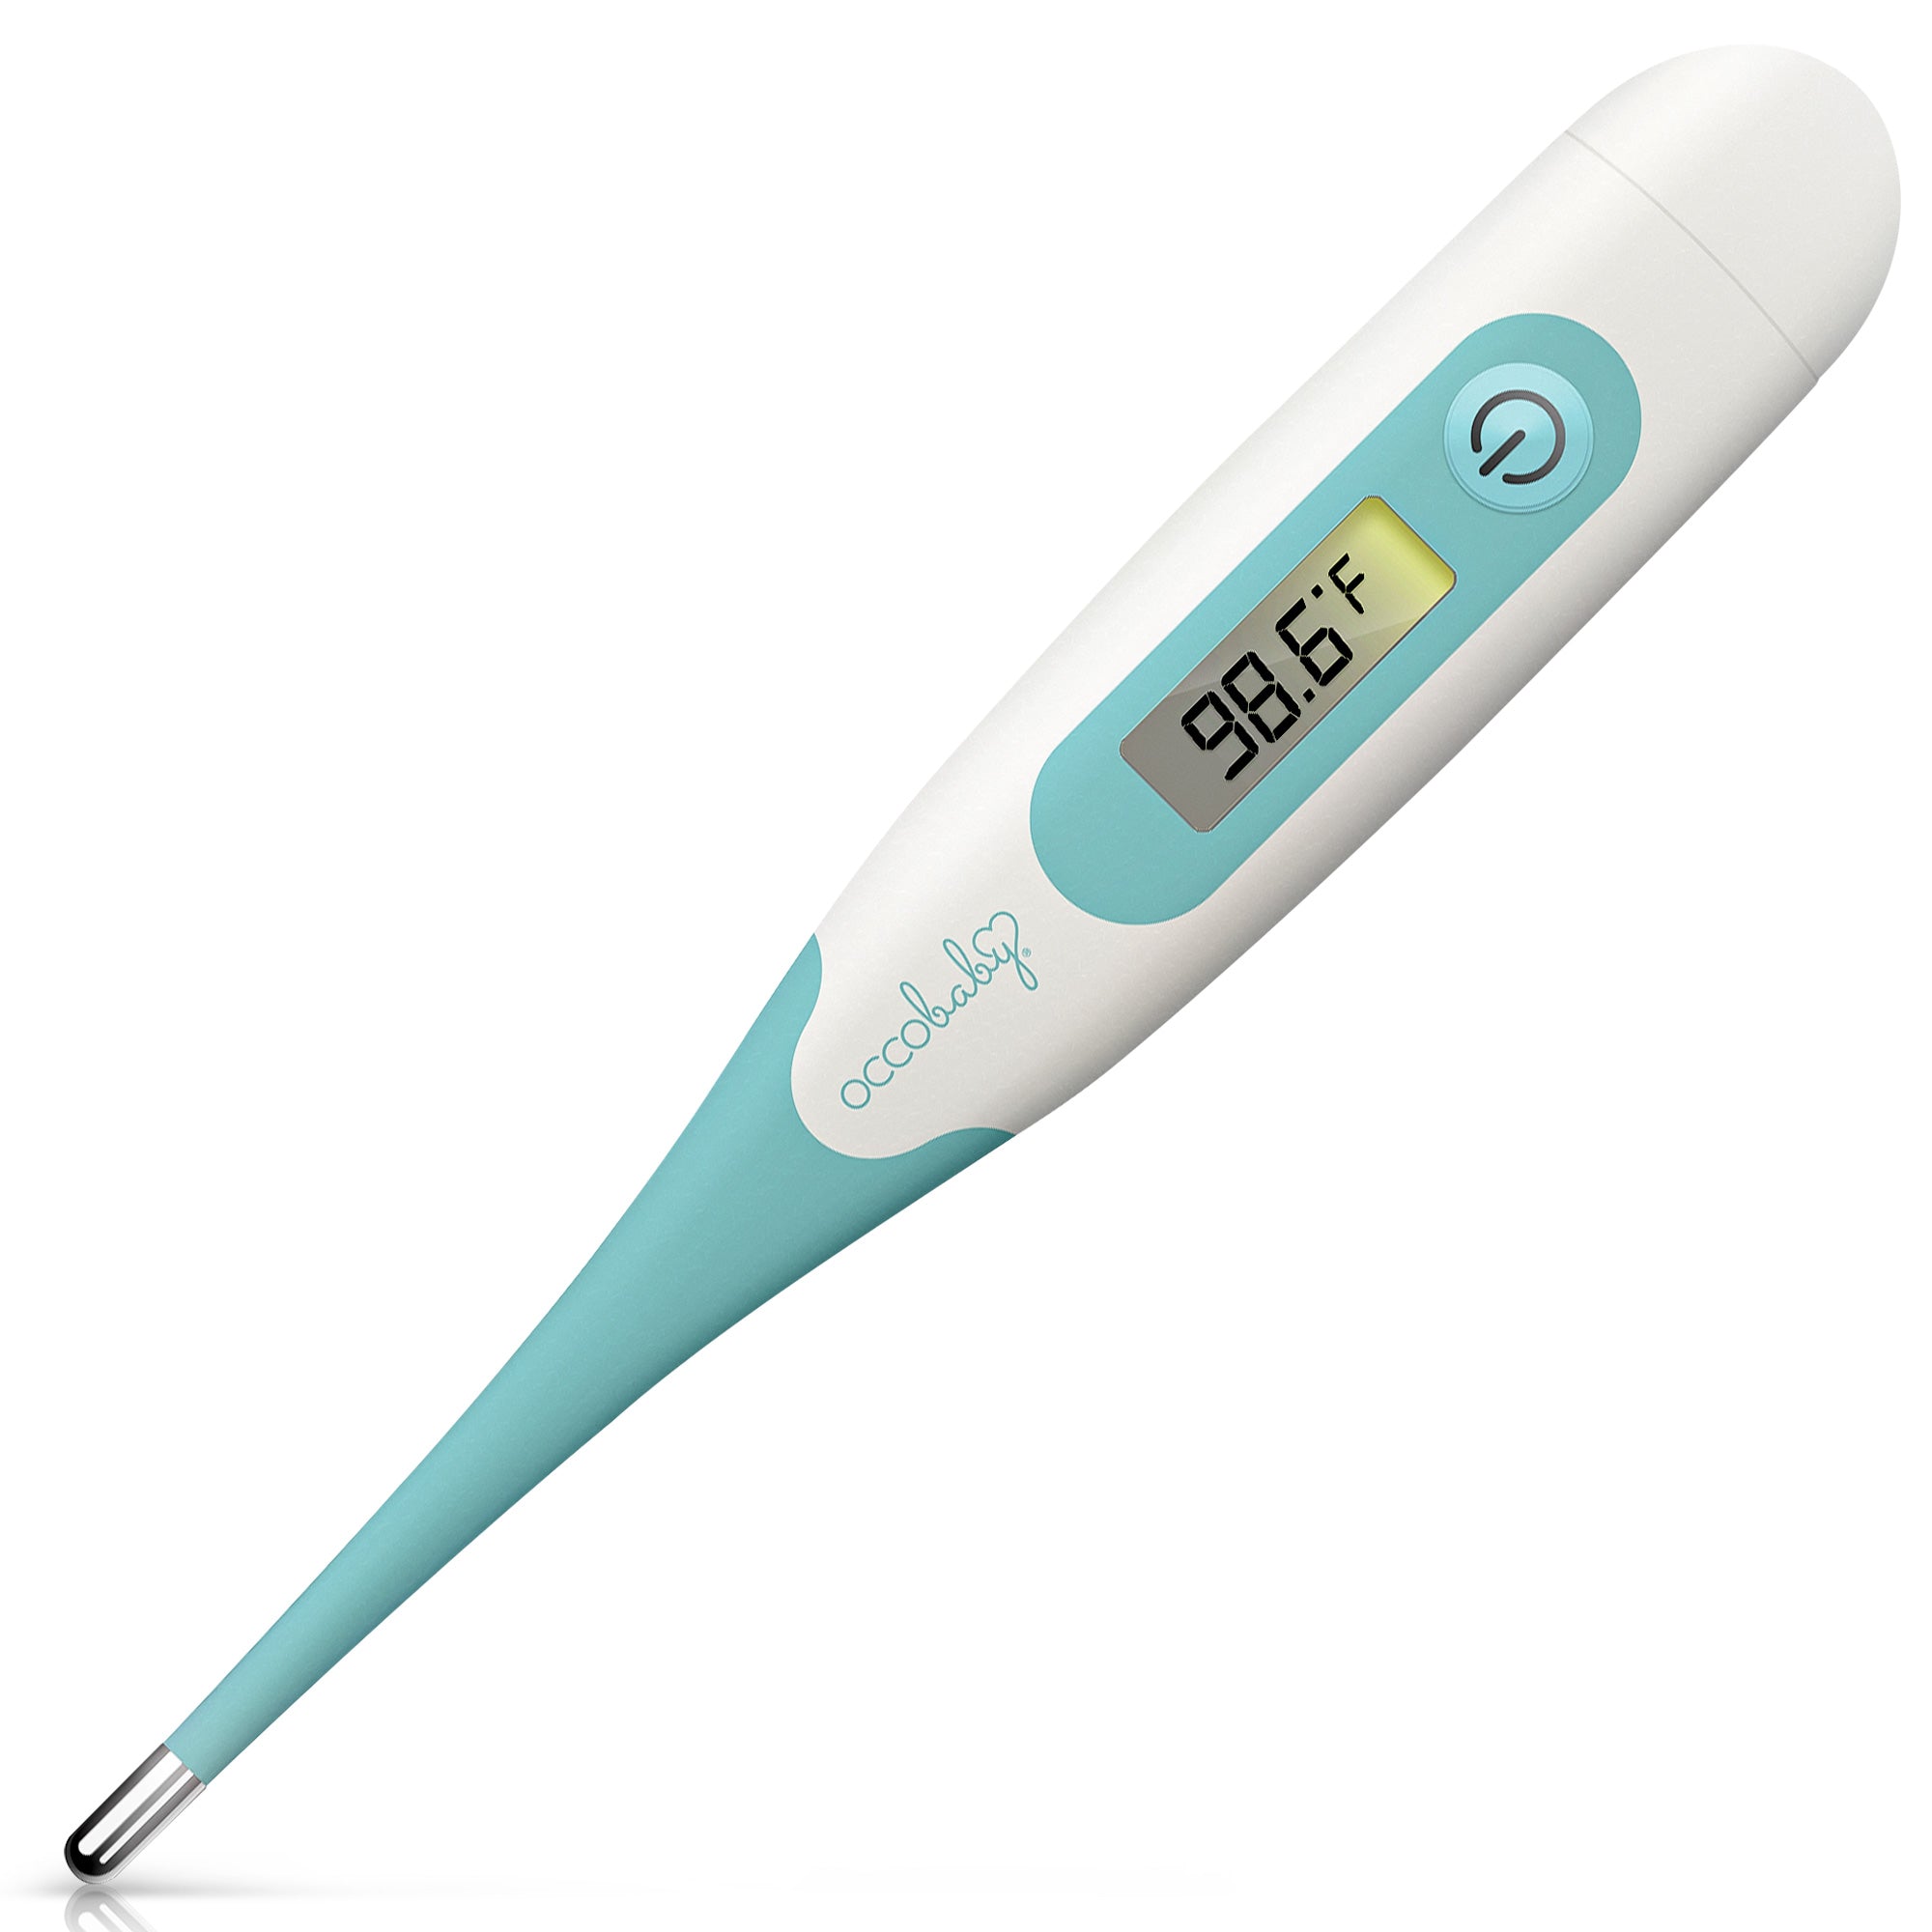 Occobaby Clinical Digital Baby Thermometer - LCD, Flexible Tip, 10 Second Quick Accurate Fever Read Rectal Oral & Underarm Use Waterproof